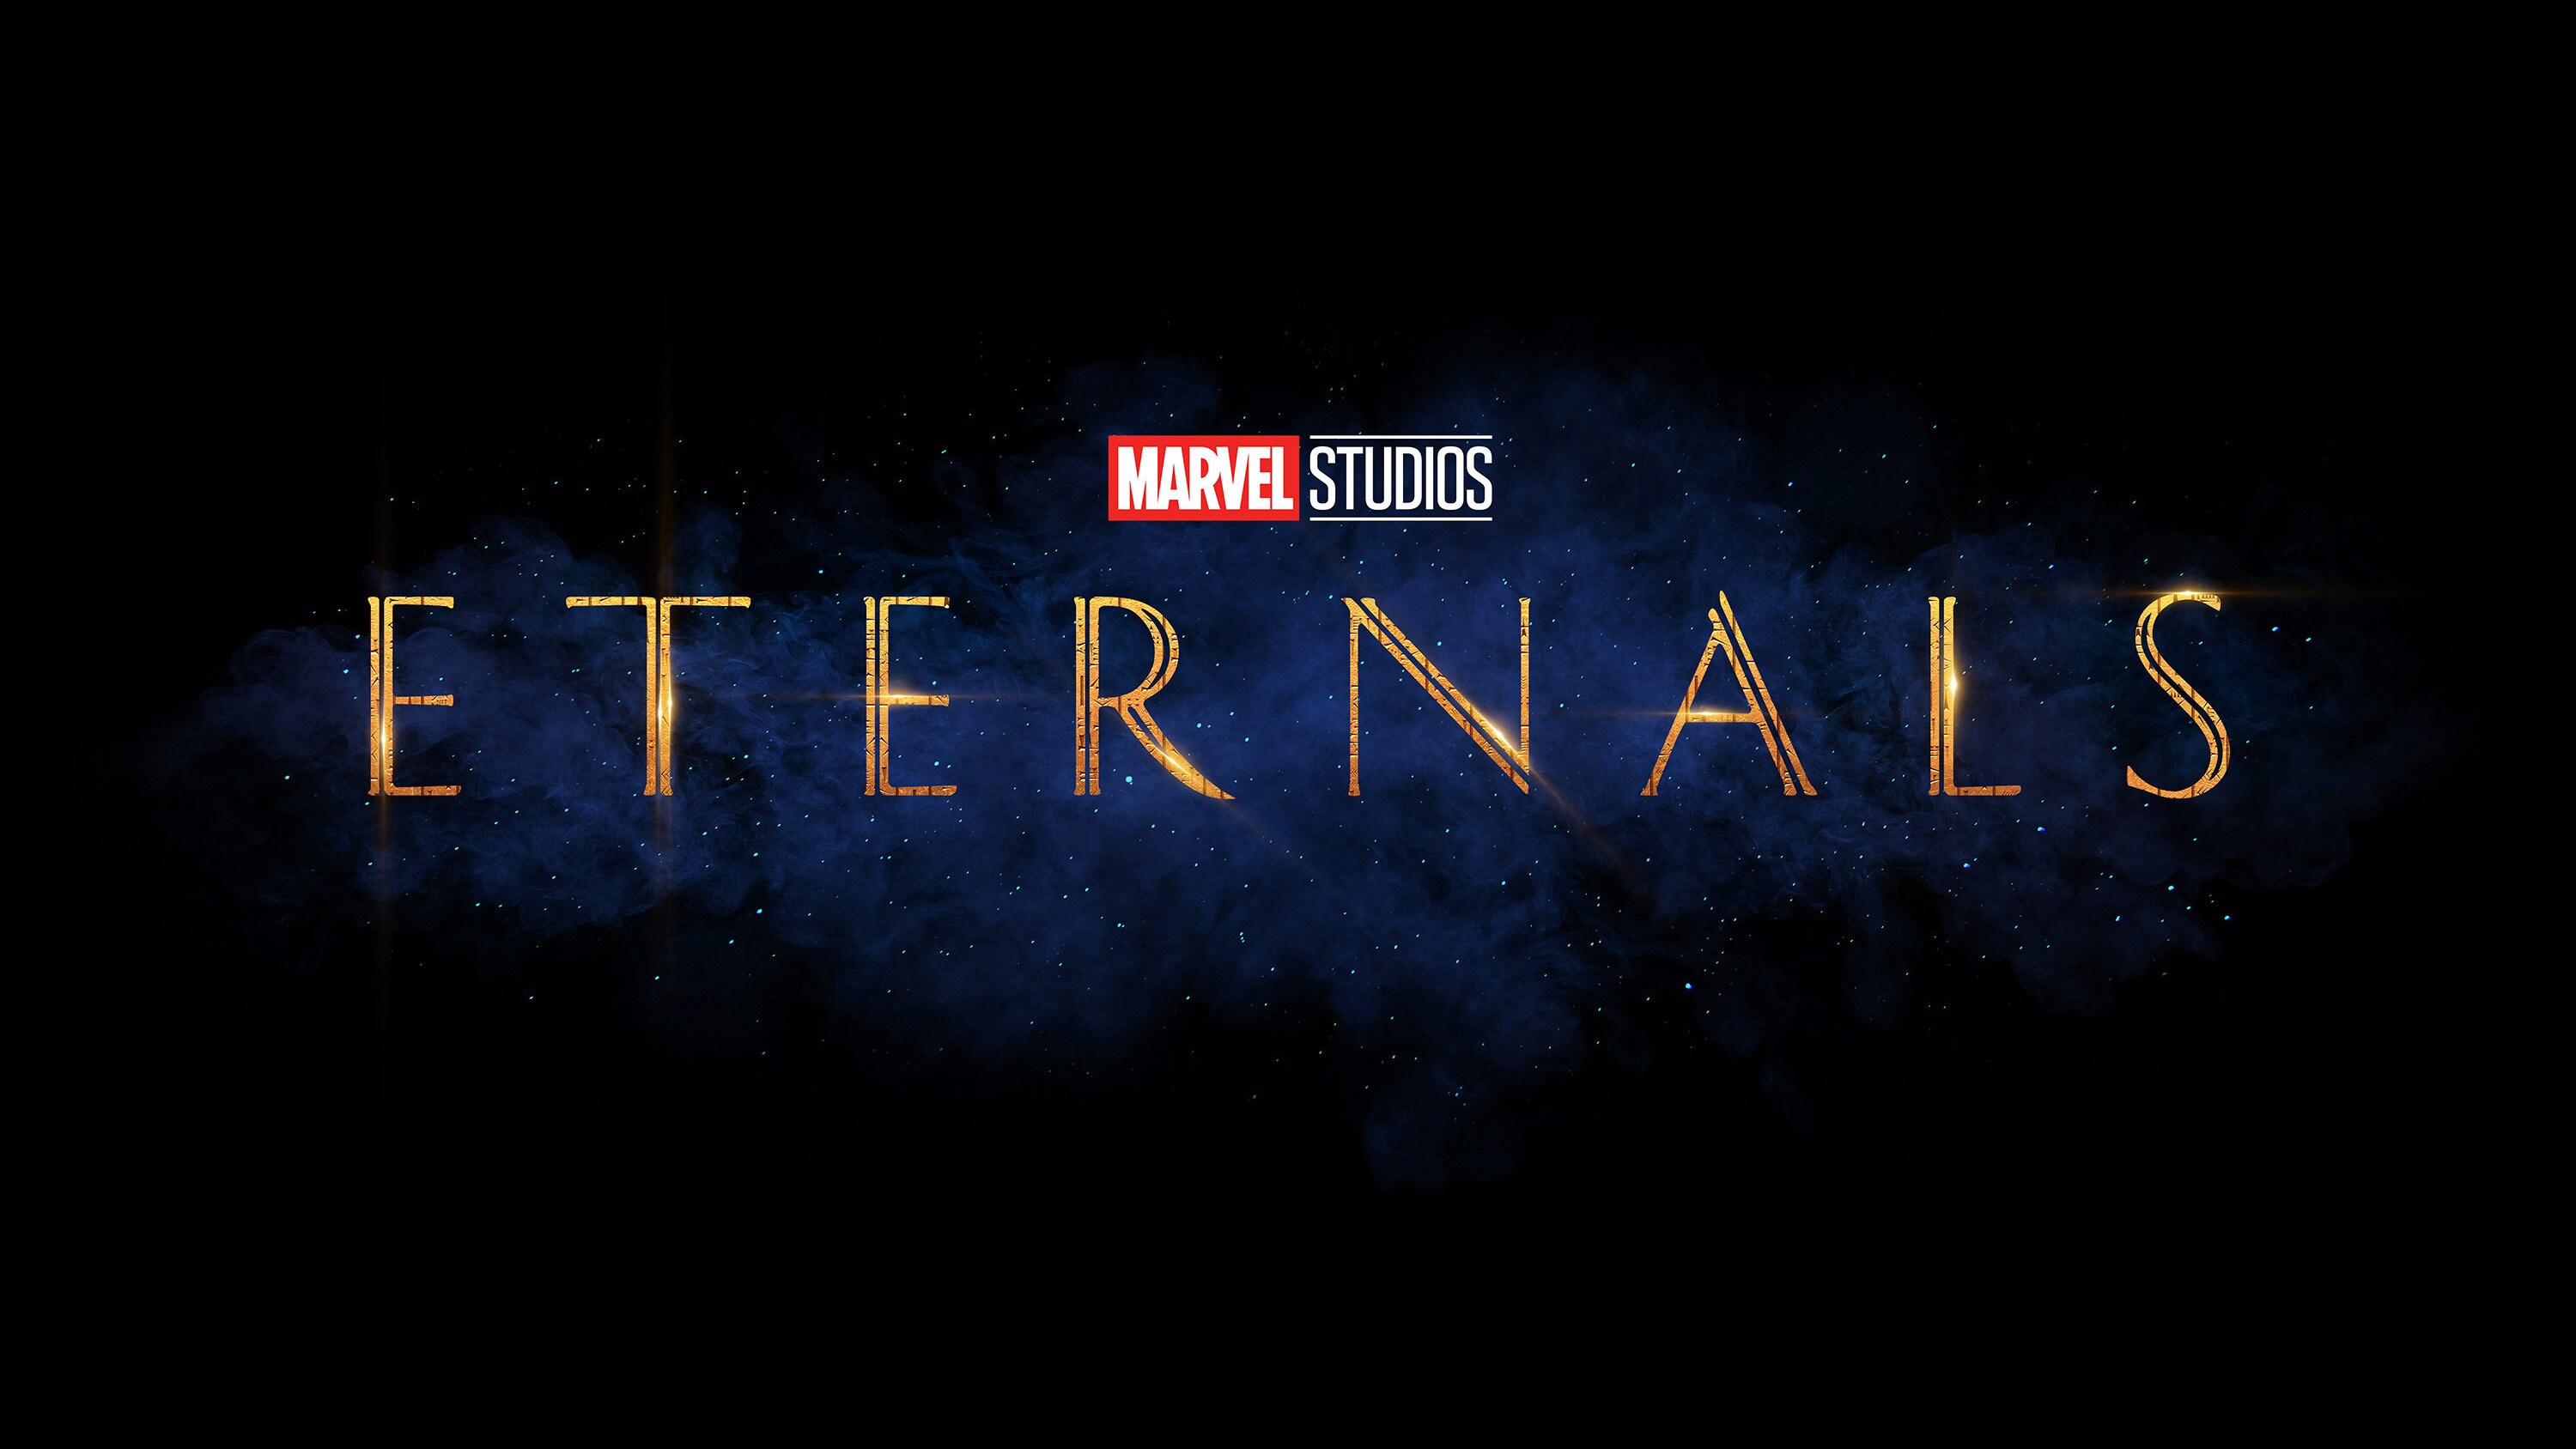 MARVEL STUDIOS’ “ETERNALS” COMES TO DISNEY+ ON 12 JANUARY